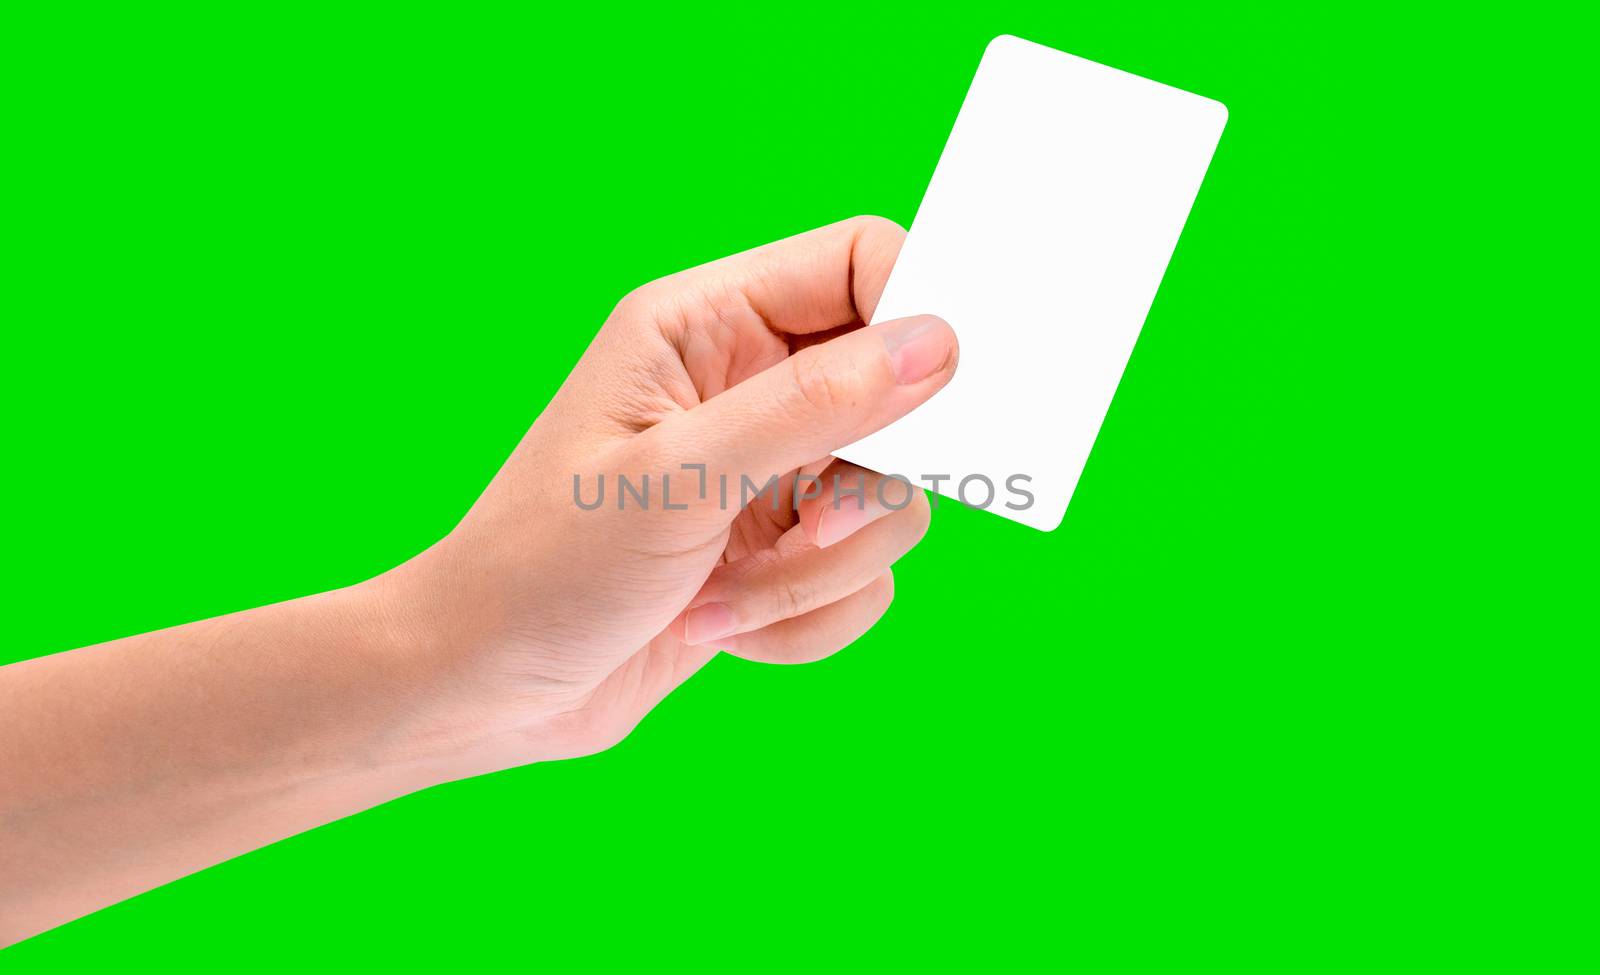 Hand hold business card, credit card or blank paper isolated on green background with clipping path.